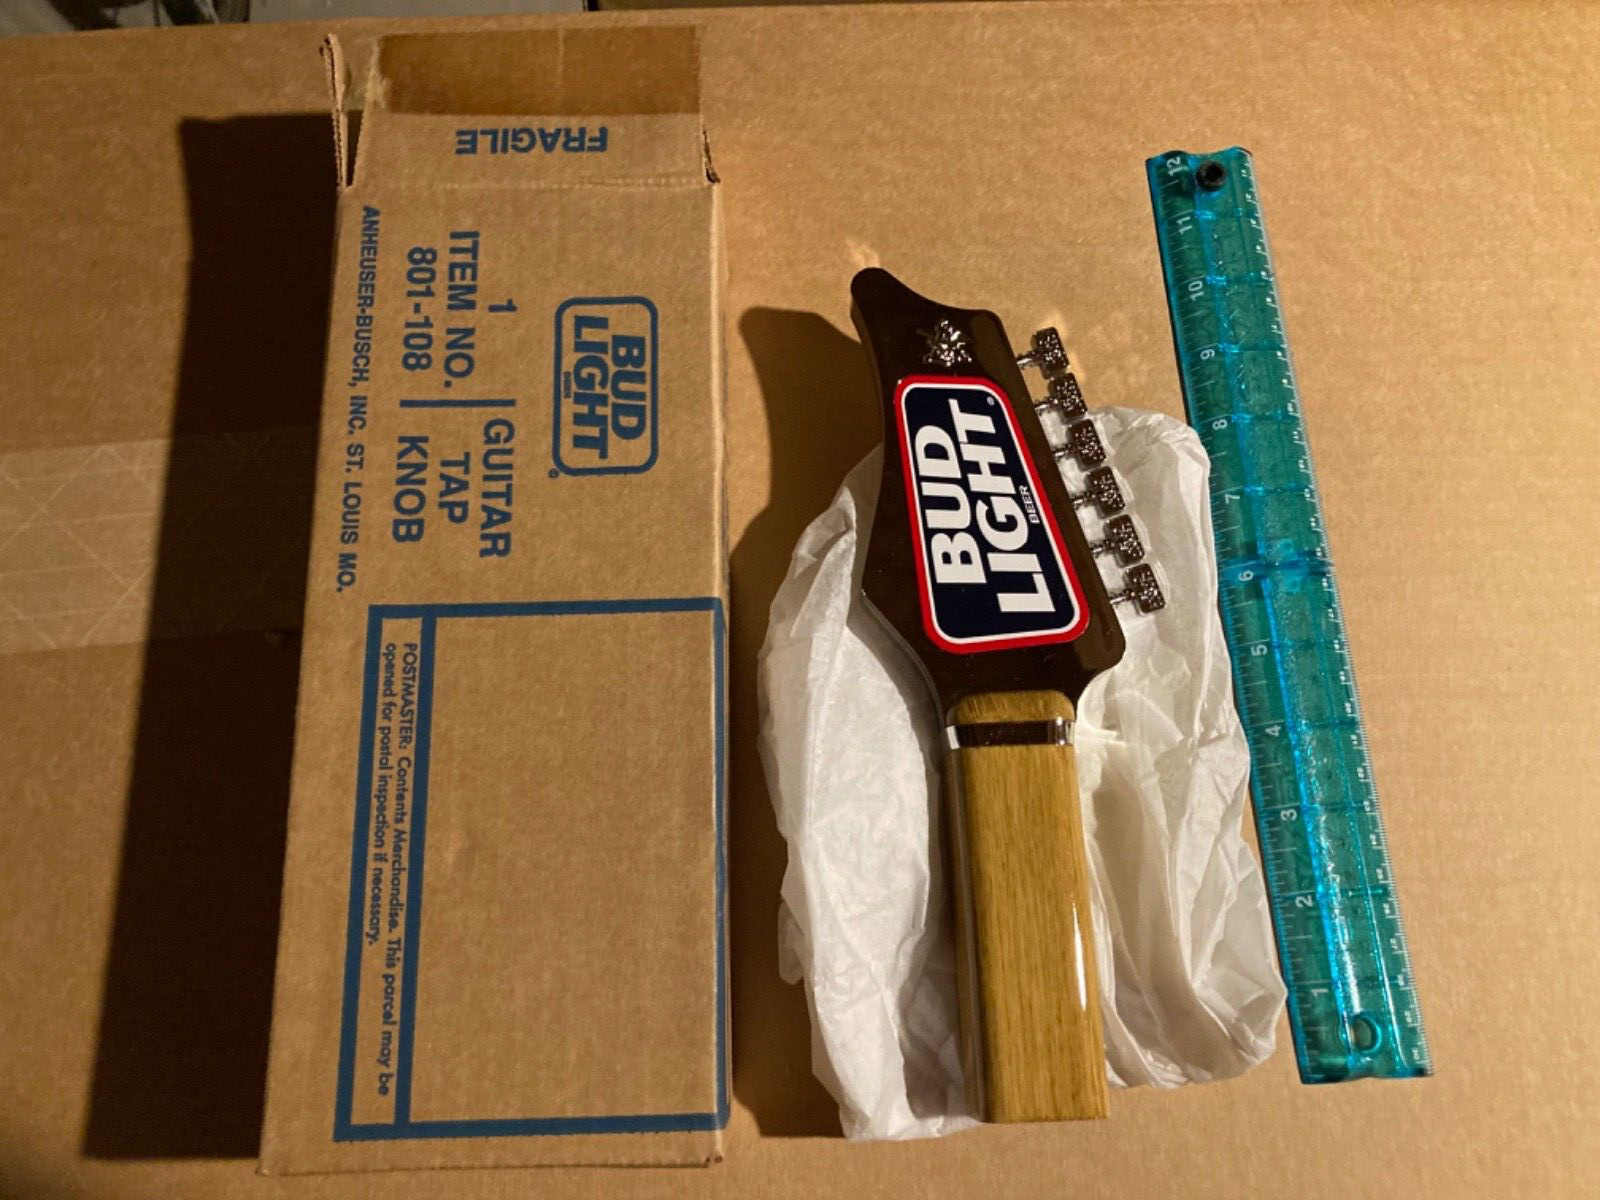 Bud Light Guitar Vintage 10 inch tap handle. New in box.